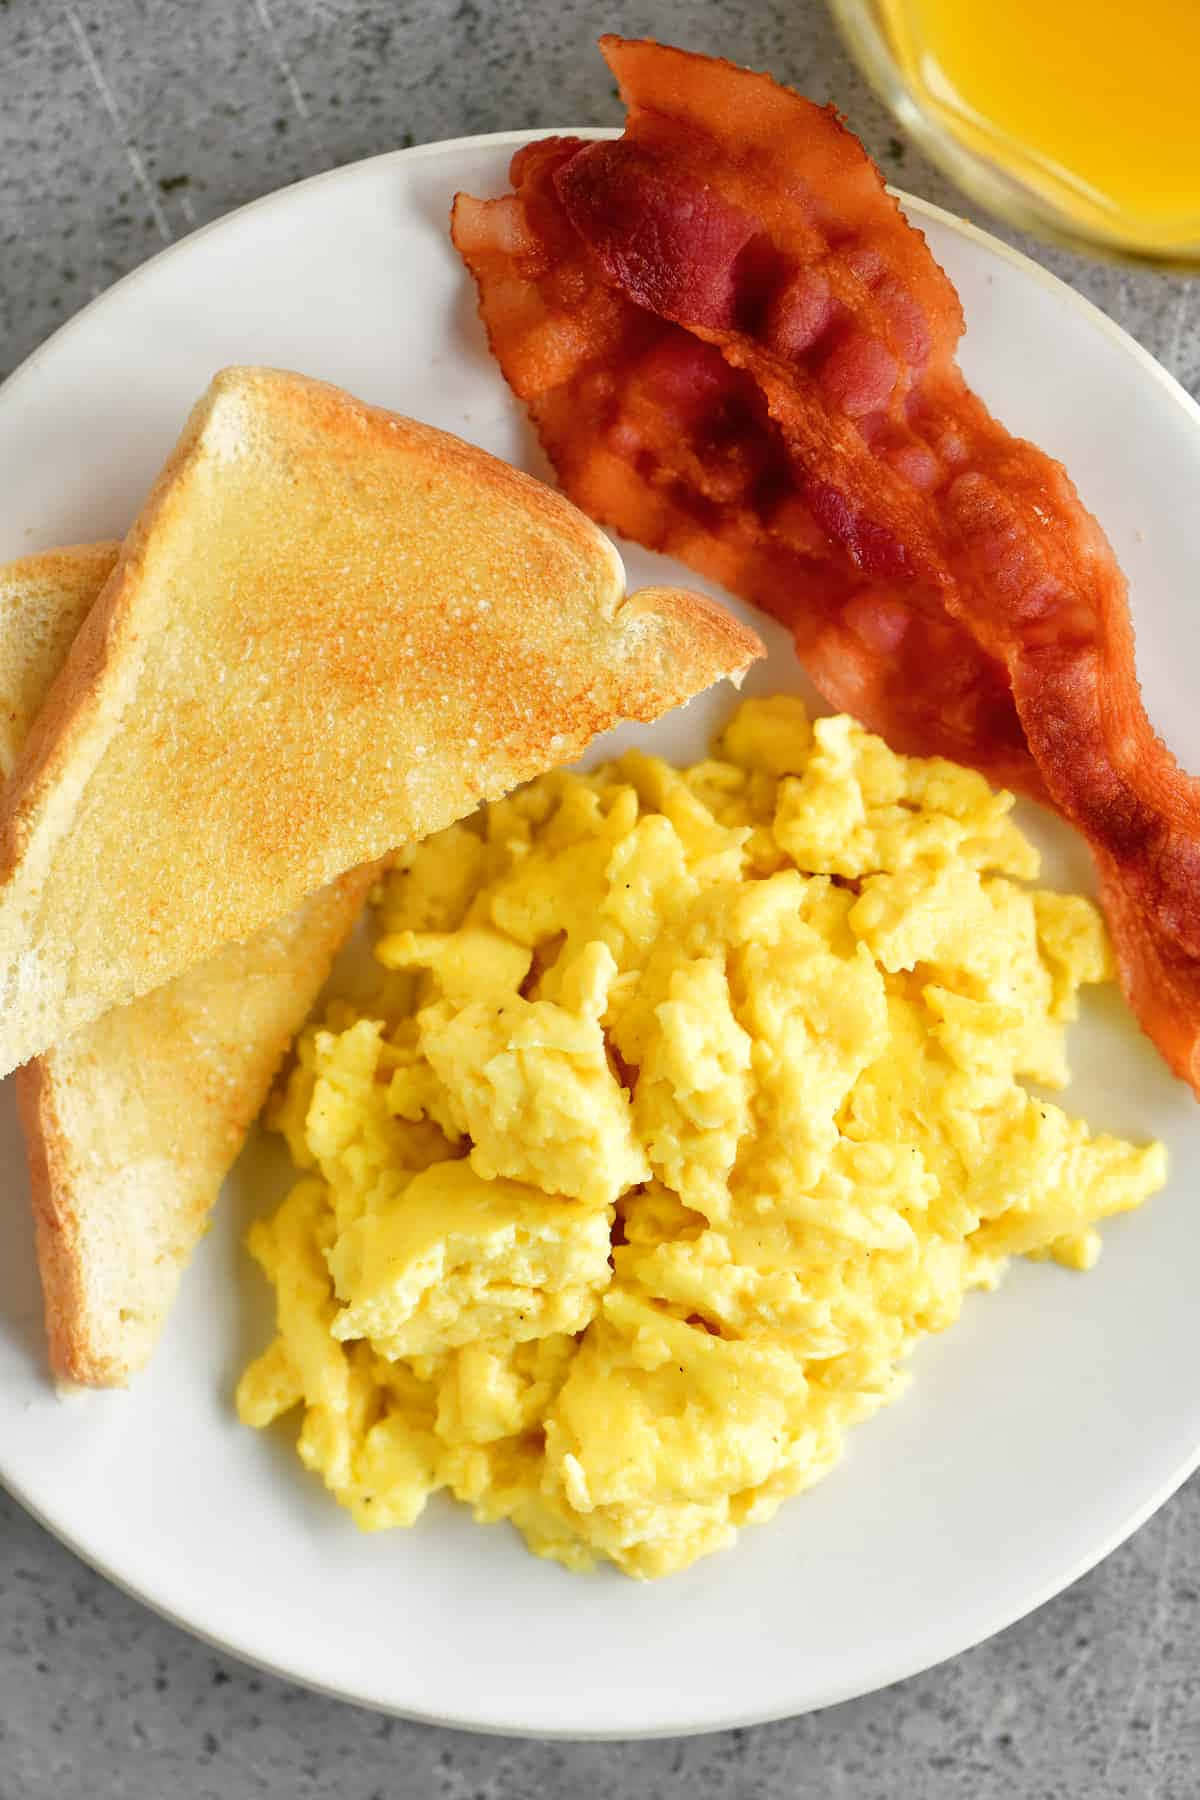 Enjoy this delicious plate of scrambled eggs